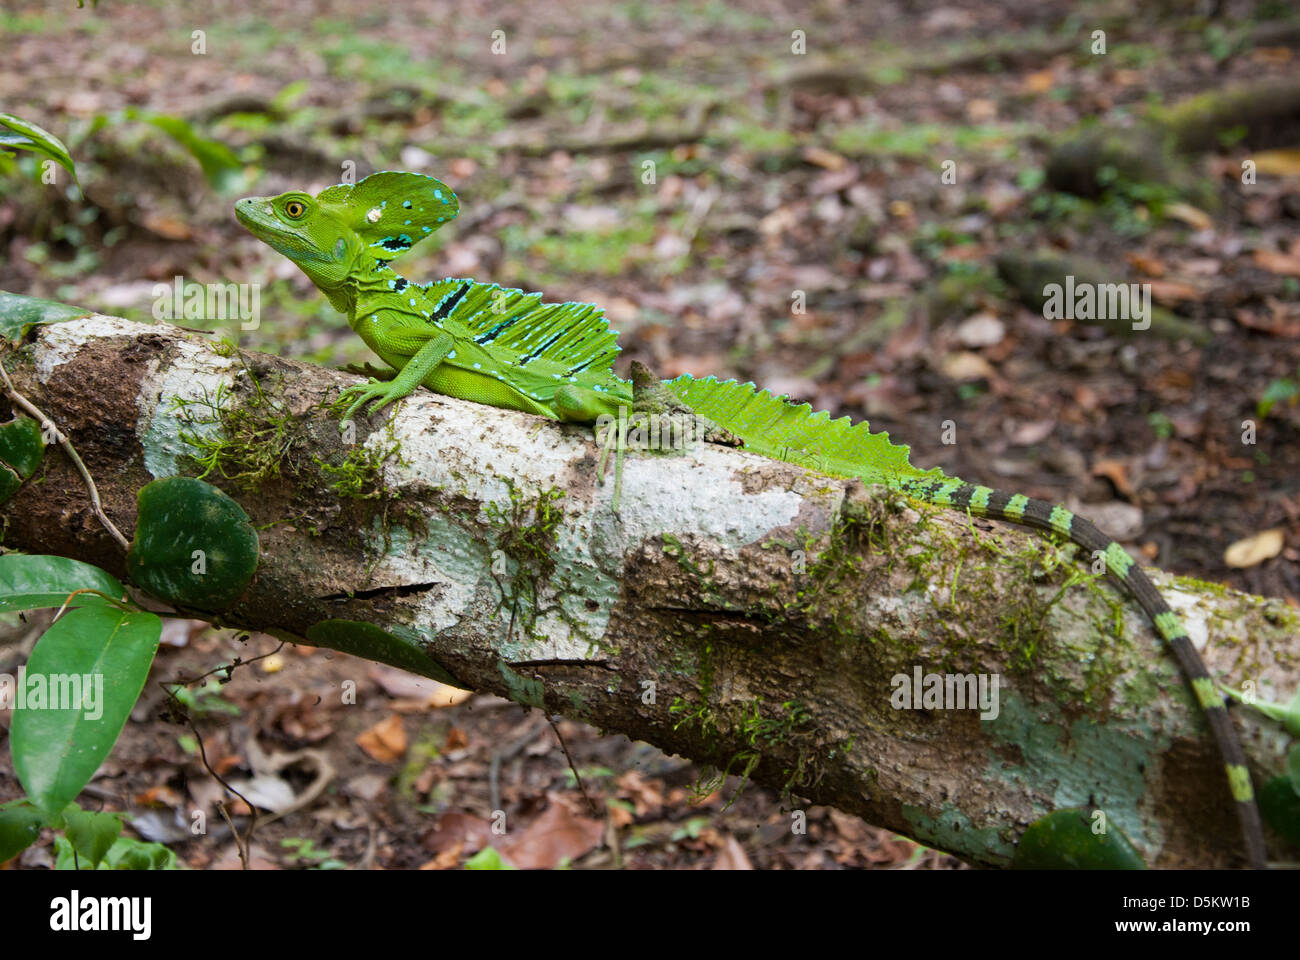 Jesus Christ lizard or Emerald Basilisk, Basilicus plumifrons, male on a trunk, in Costa Rica., Central America. Stock Photo